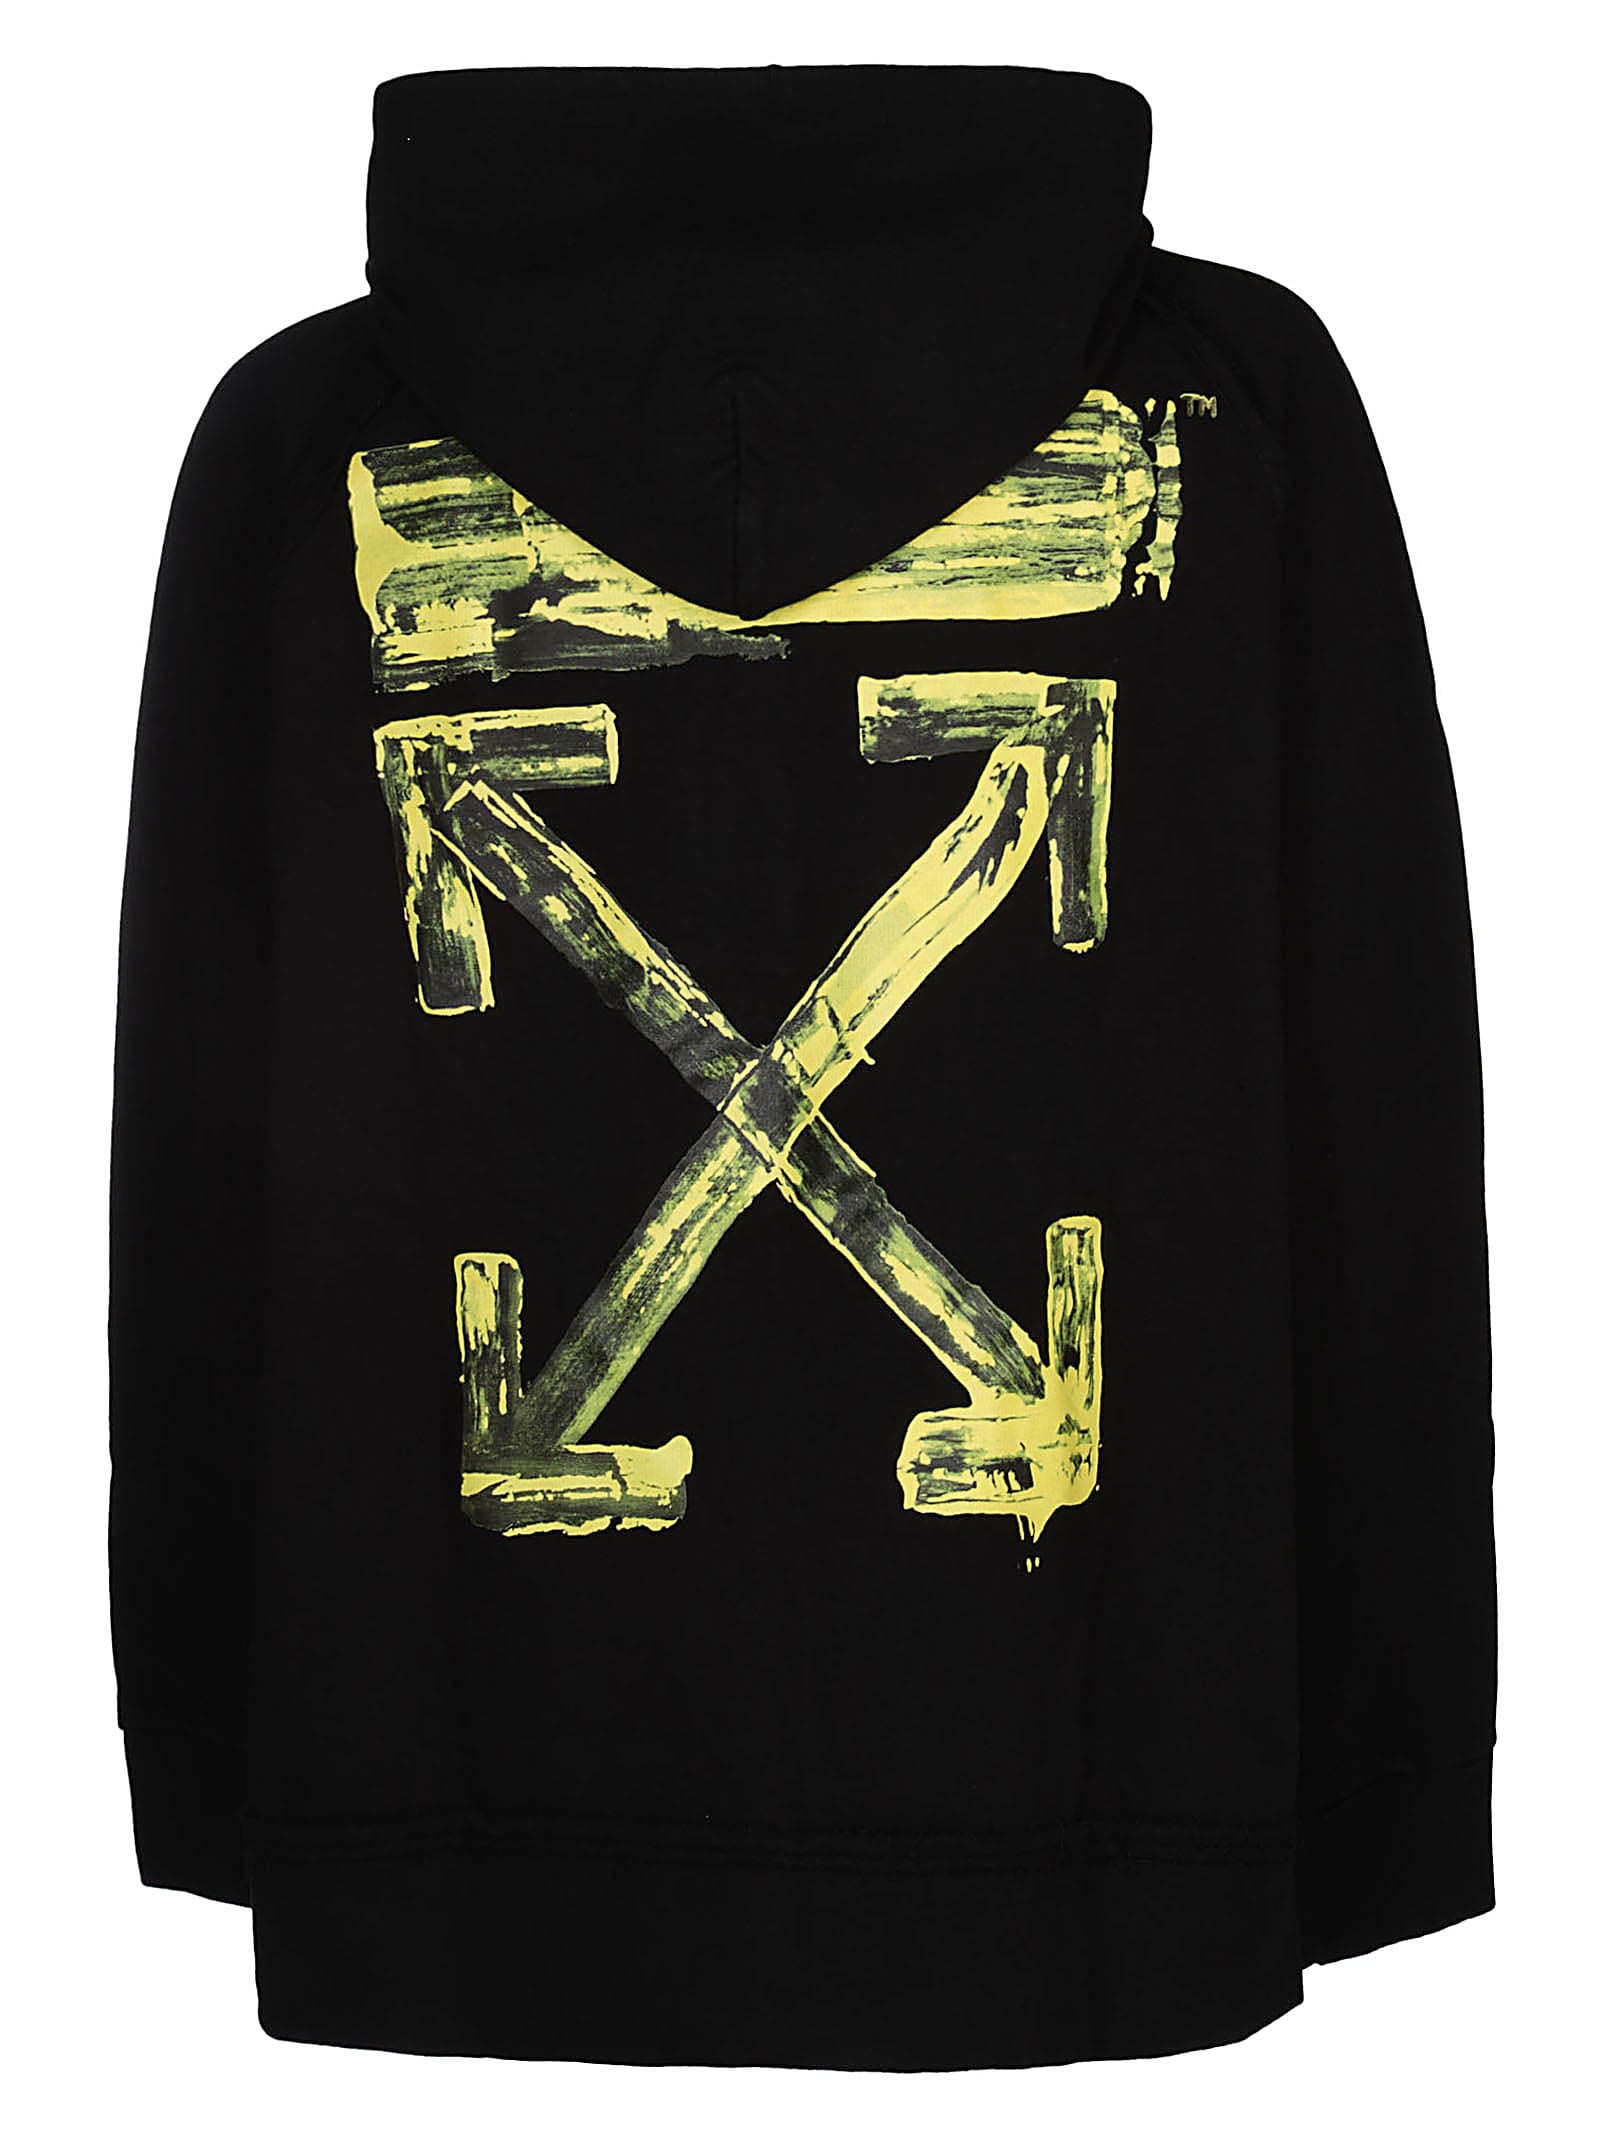 black and yellow off white hoodie